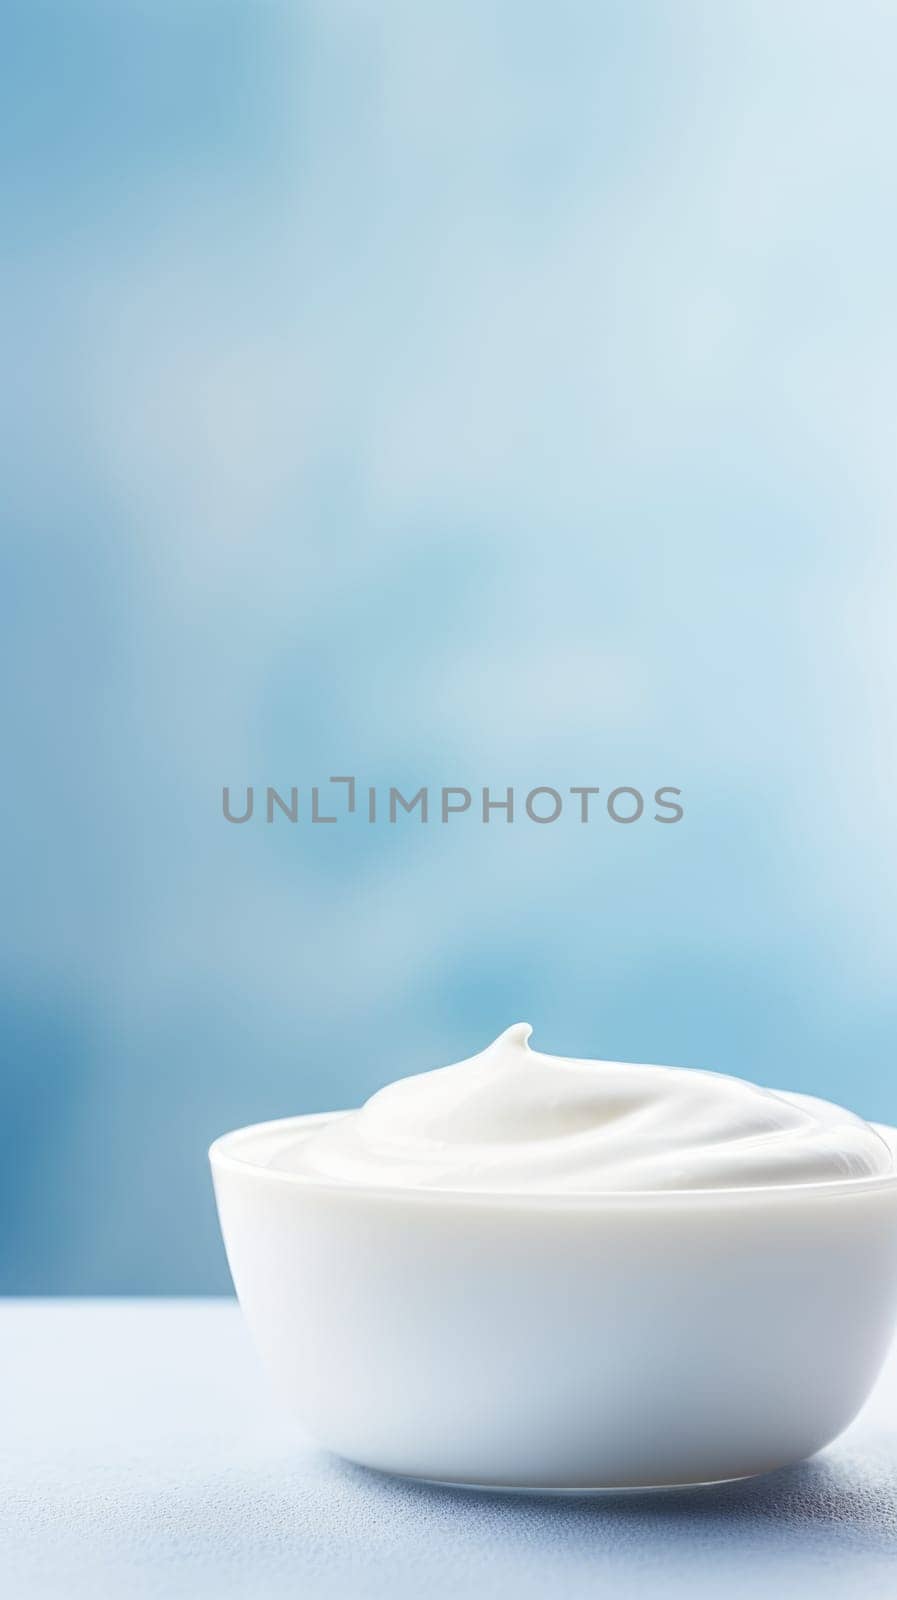 A bowl of yogurt on a blue background, AI by starush